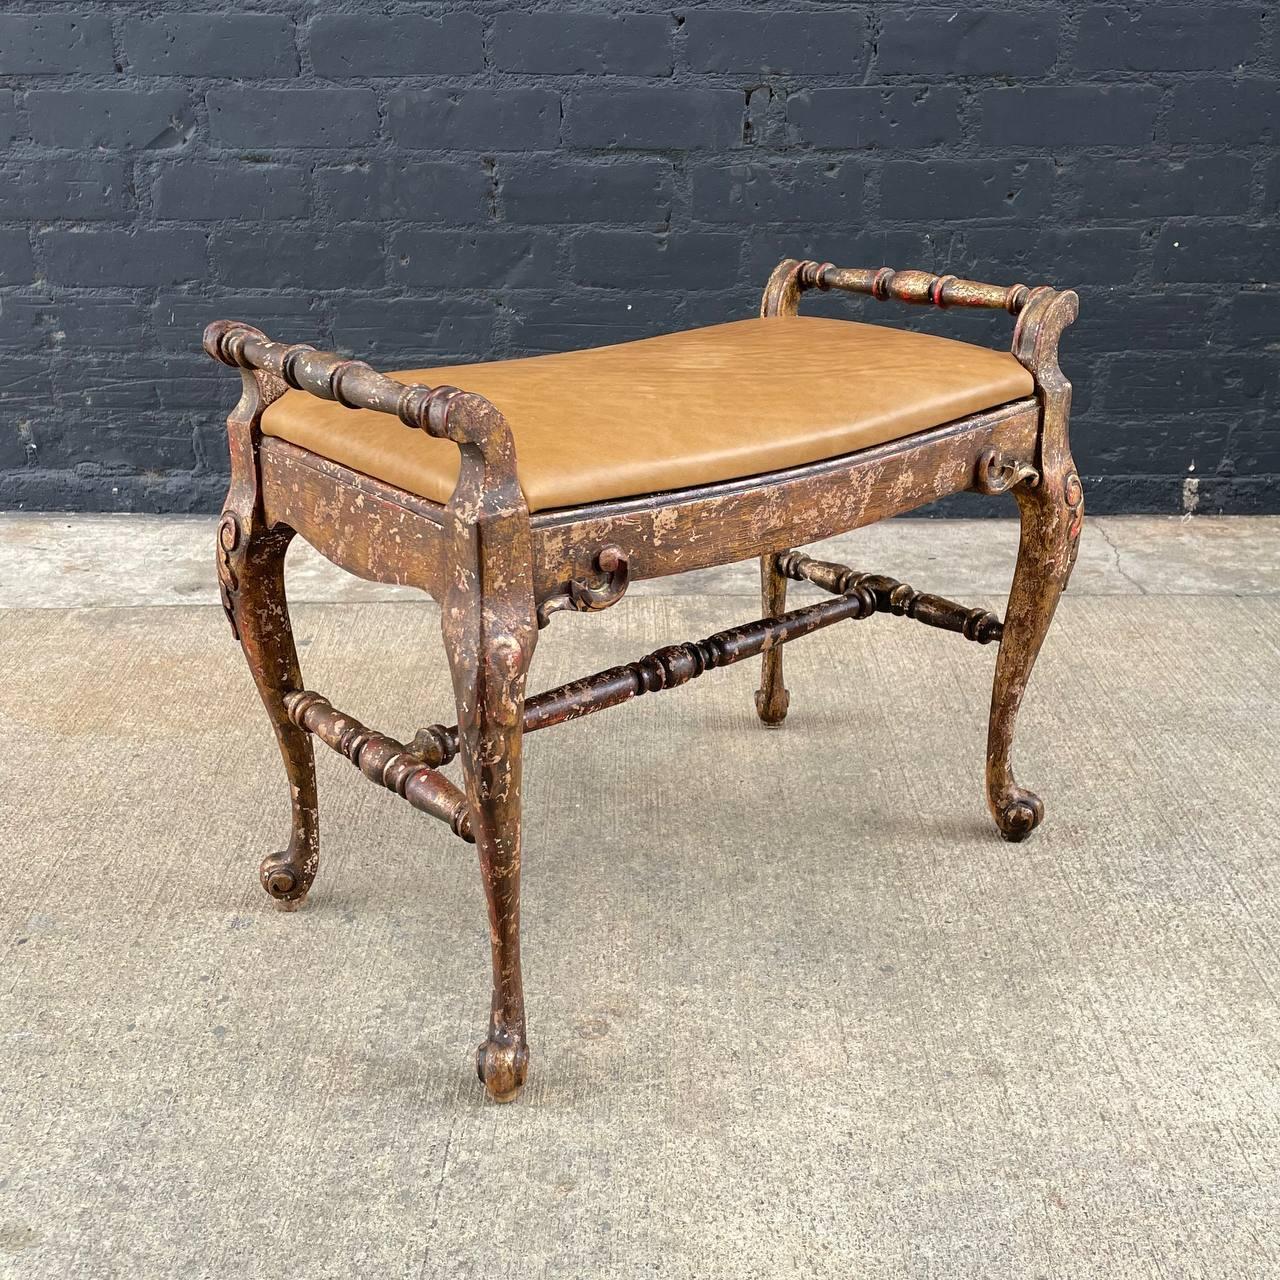 English Style giltwood & Leather Bench with Cabriole Legs

Country: United States
Materials: giltwood Finish, New Leather Upholstery 
Condition: New Leather Upholstery
Style: Antique
Year: 1930s

$1,450

Dimensions 
20.50”H x 25”W x